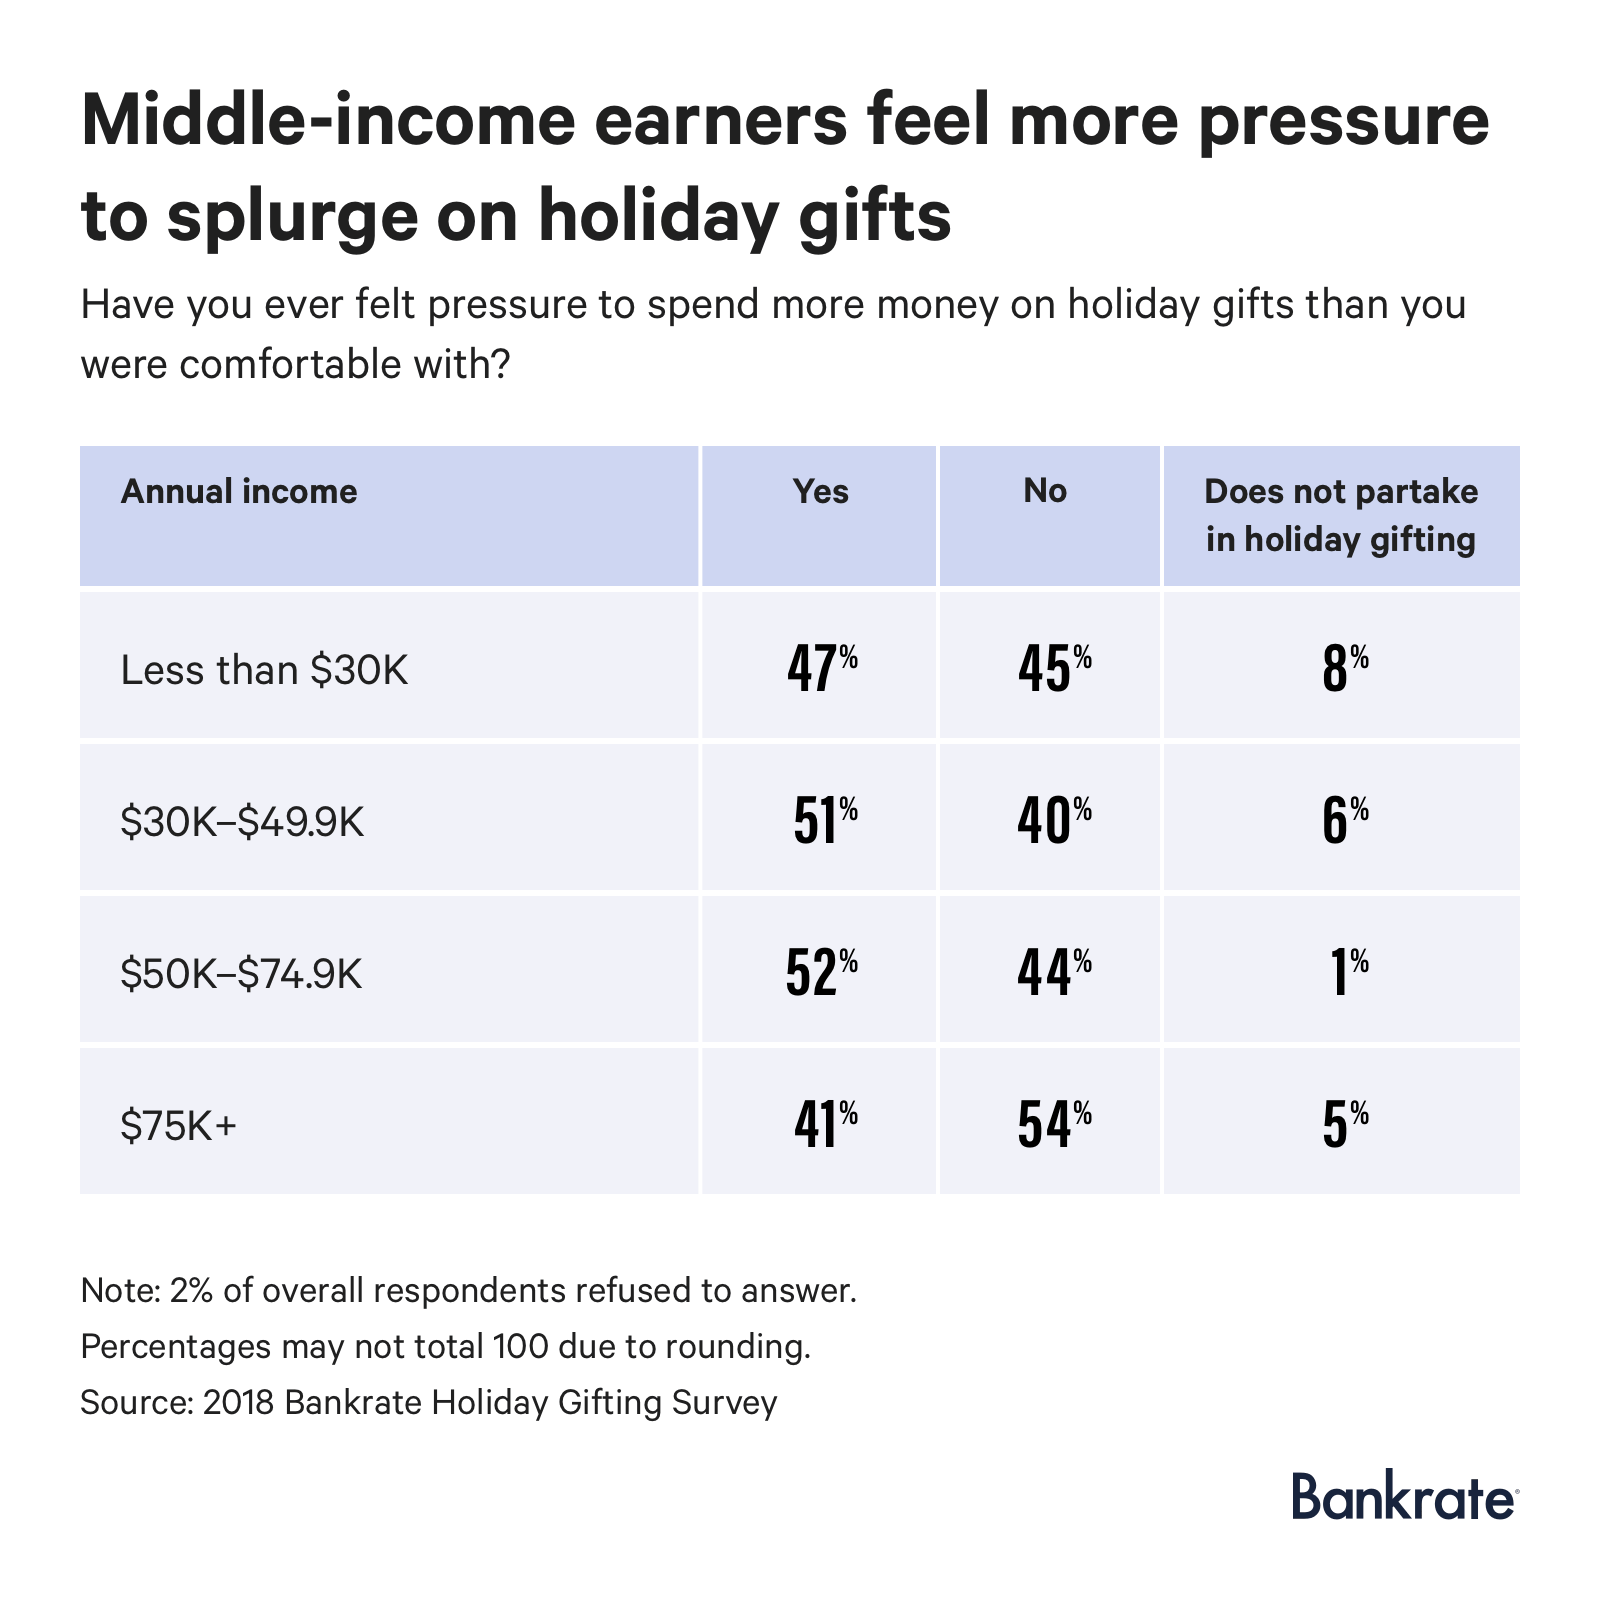 52% of middle-income earners are pressured to spend more